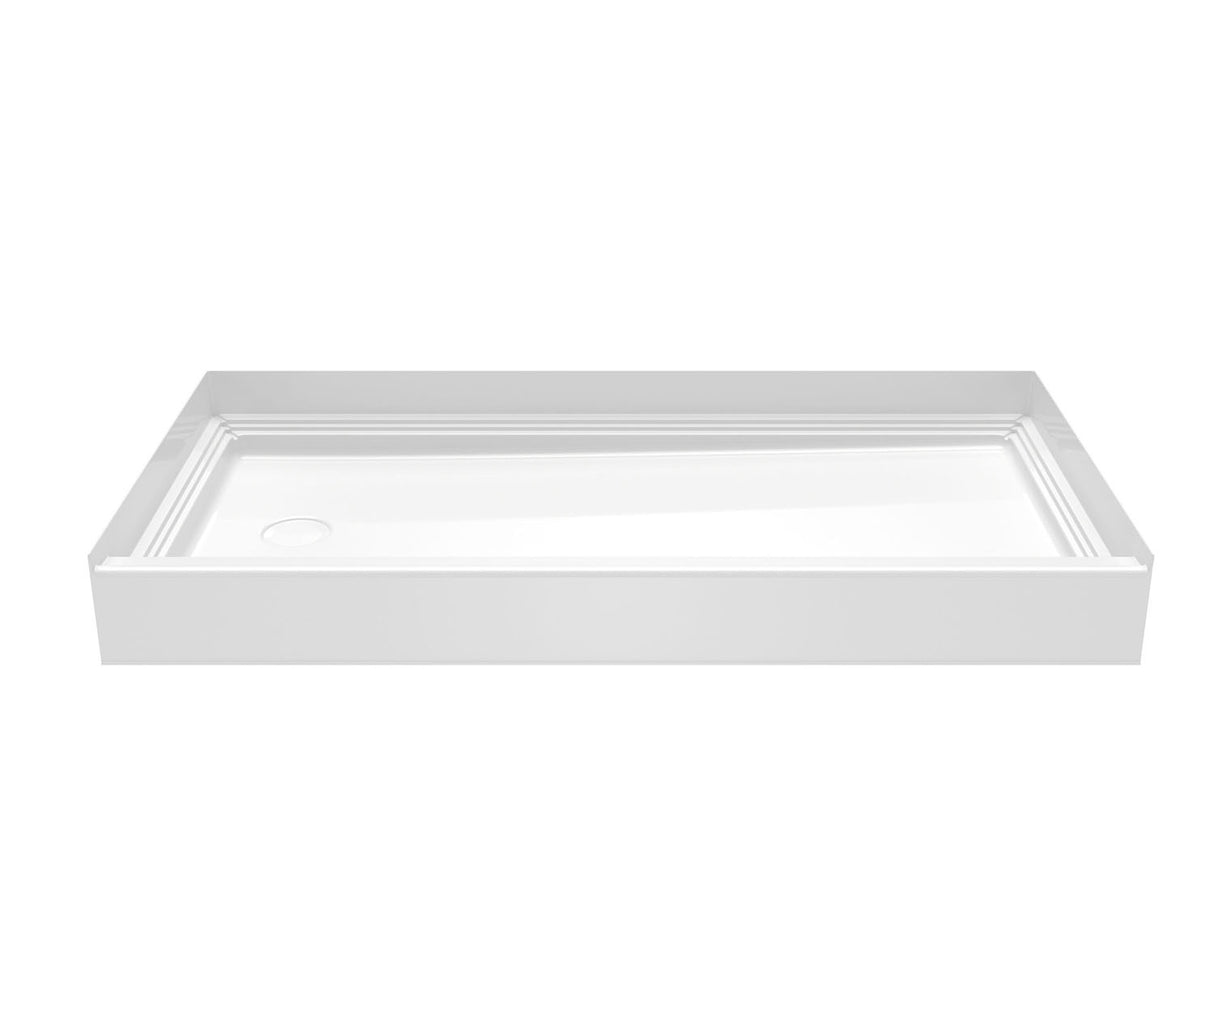 Swanstone VP6030CPANL/R Solid Surface Alcove Shower Pan with Left Hand Drain in White VP6030CPANL.010